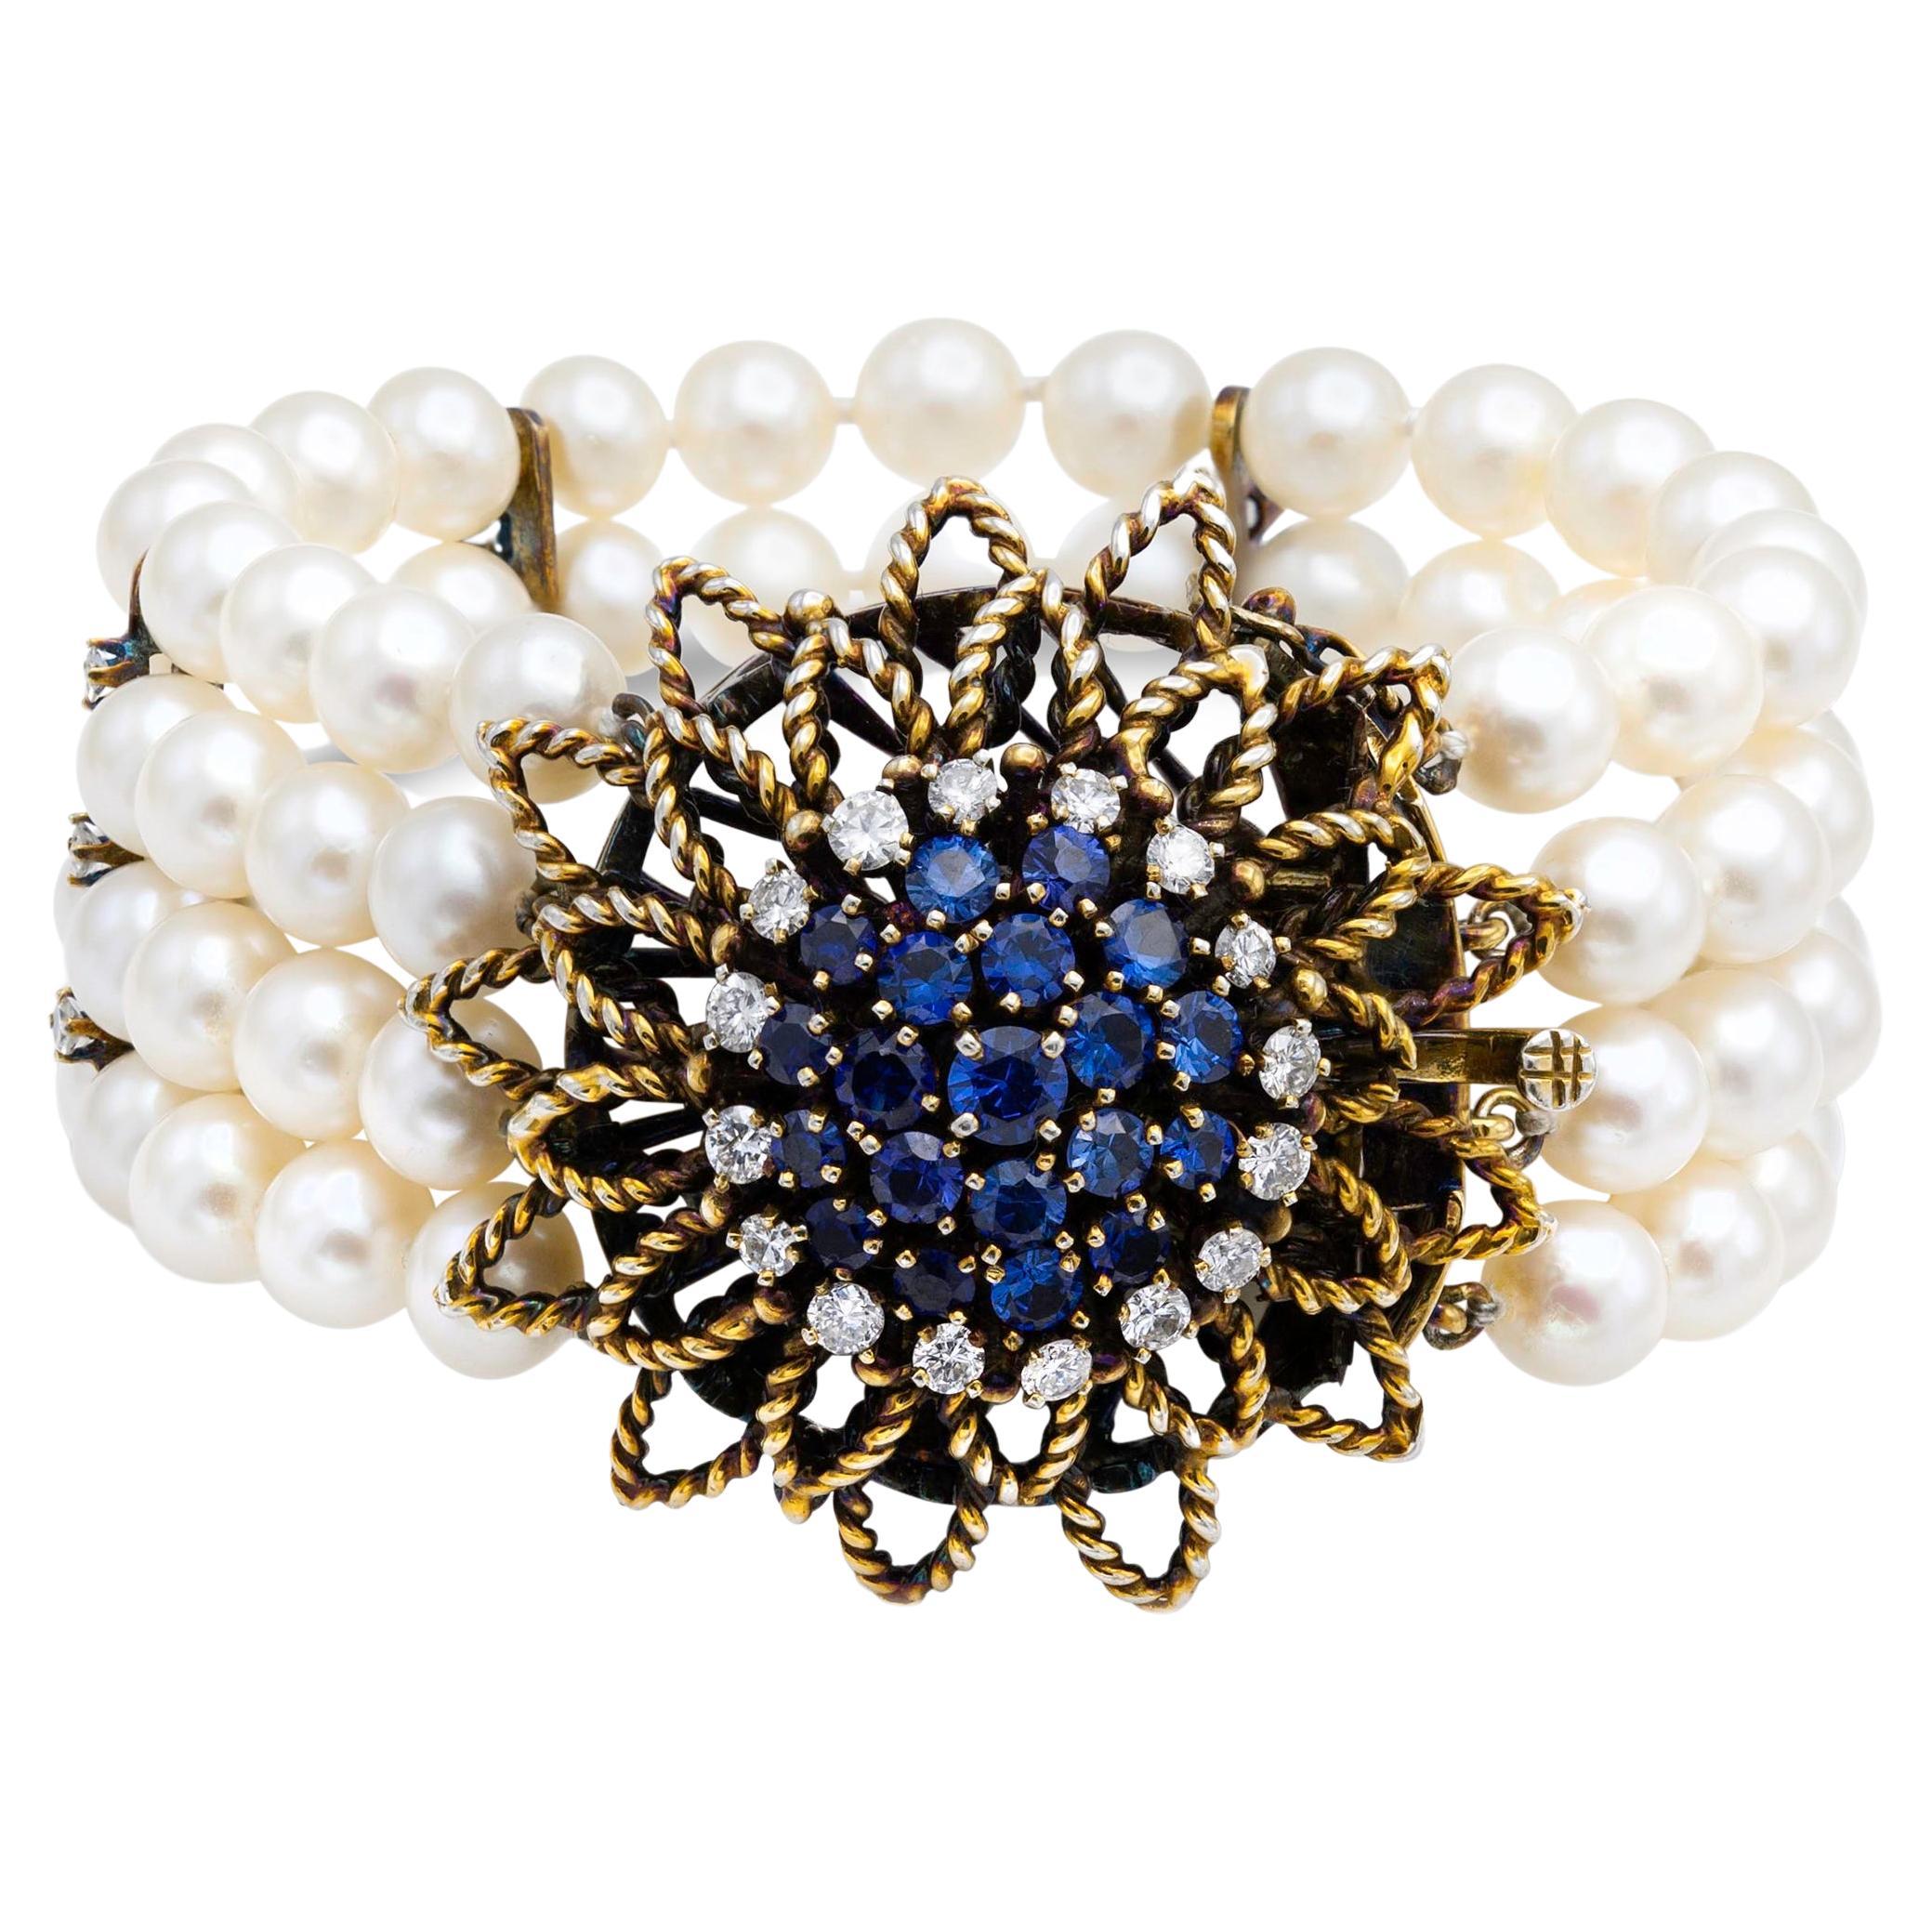 4 Strand Pearl Bracelet with Sapphire Flower Clasp For Sale